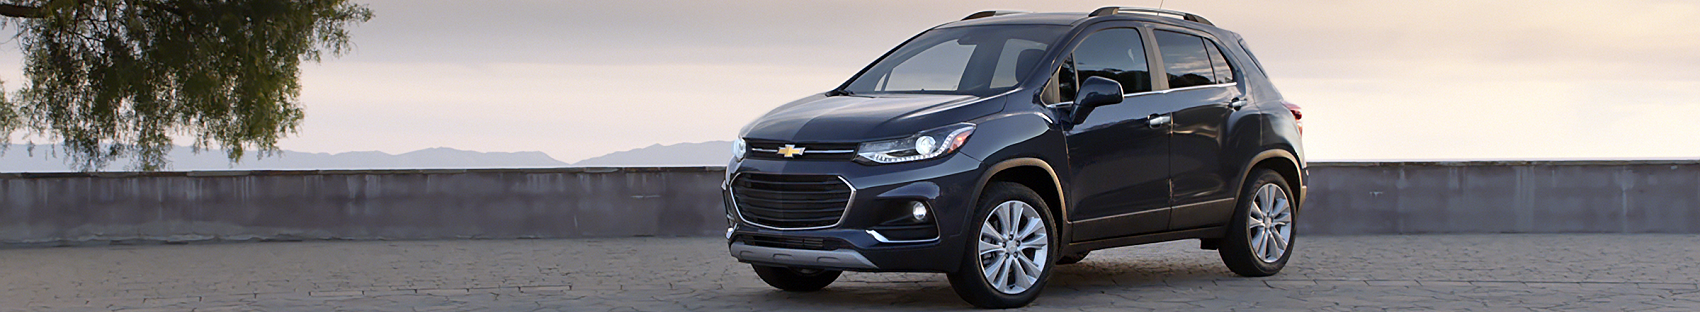 Chevrolet Trax for sale